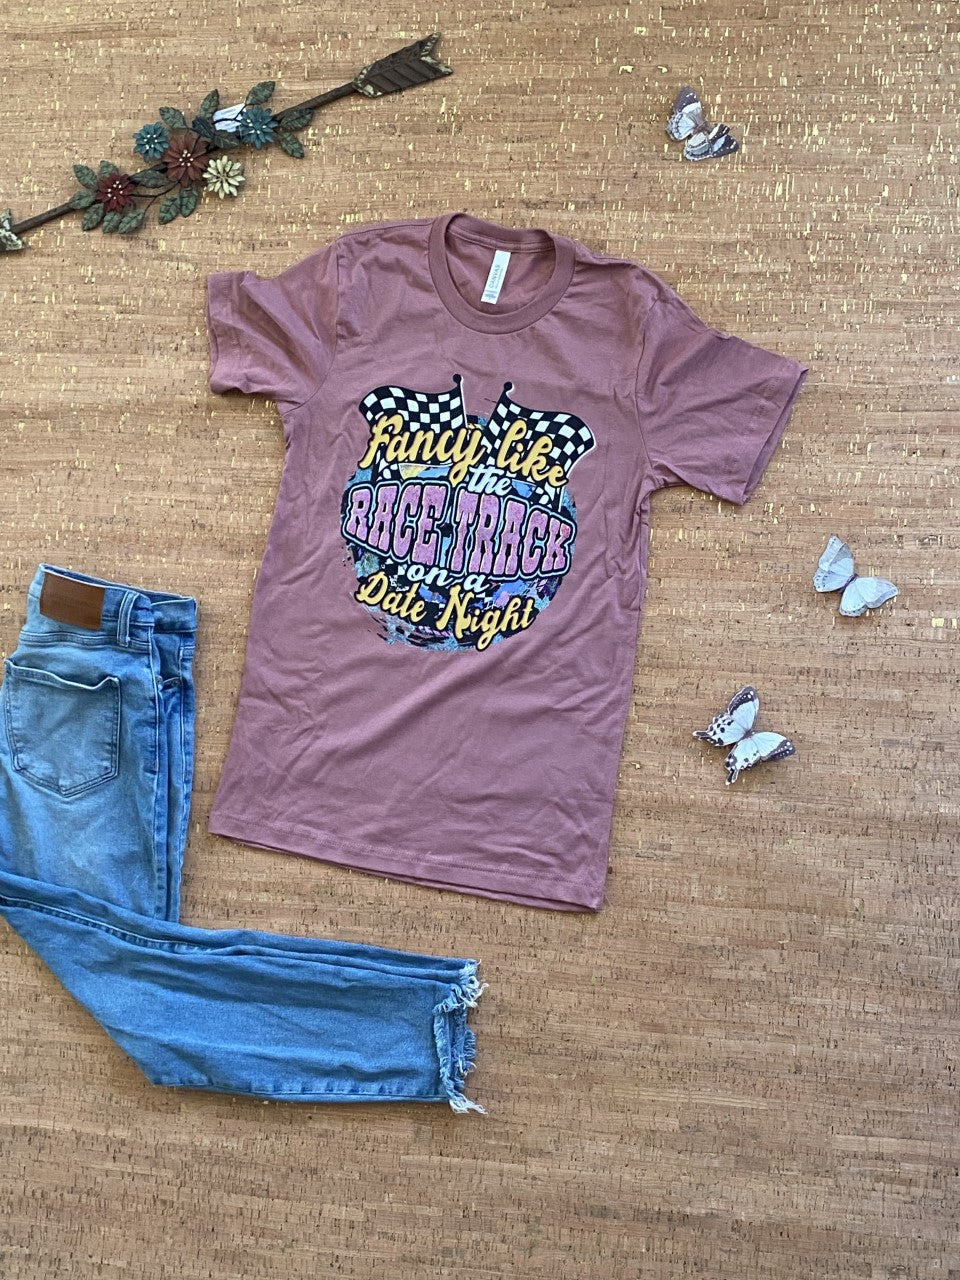 FANCY LIKE THE RACE TRACK ON DATE NIGHT GRAPHIC TEE